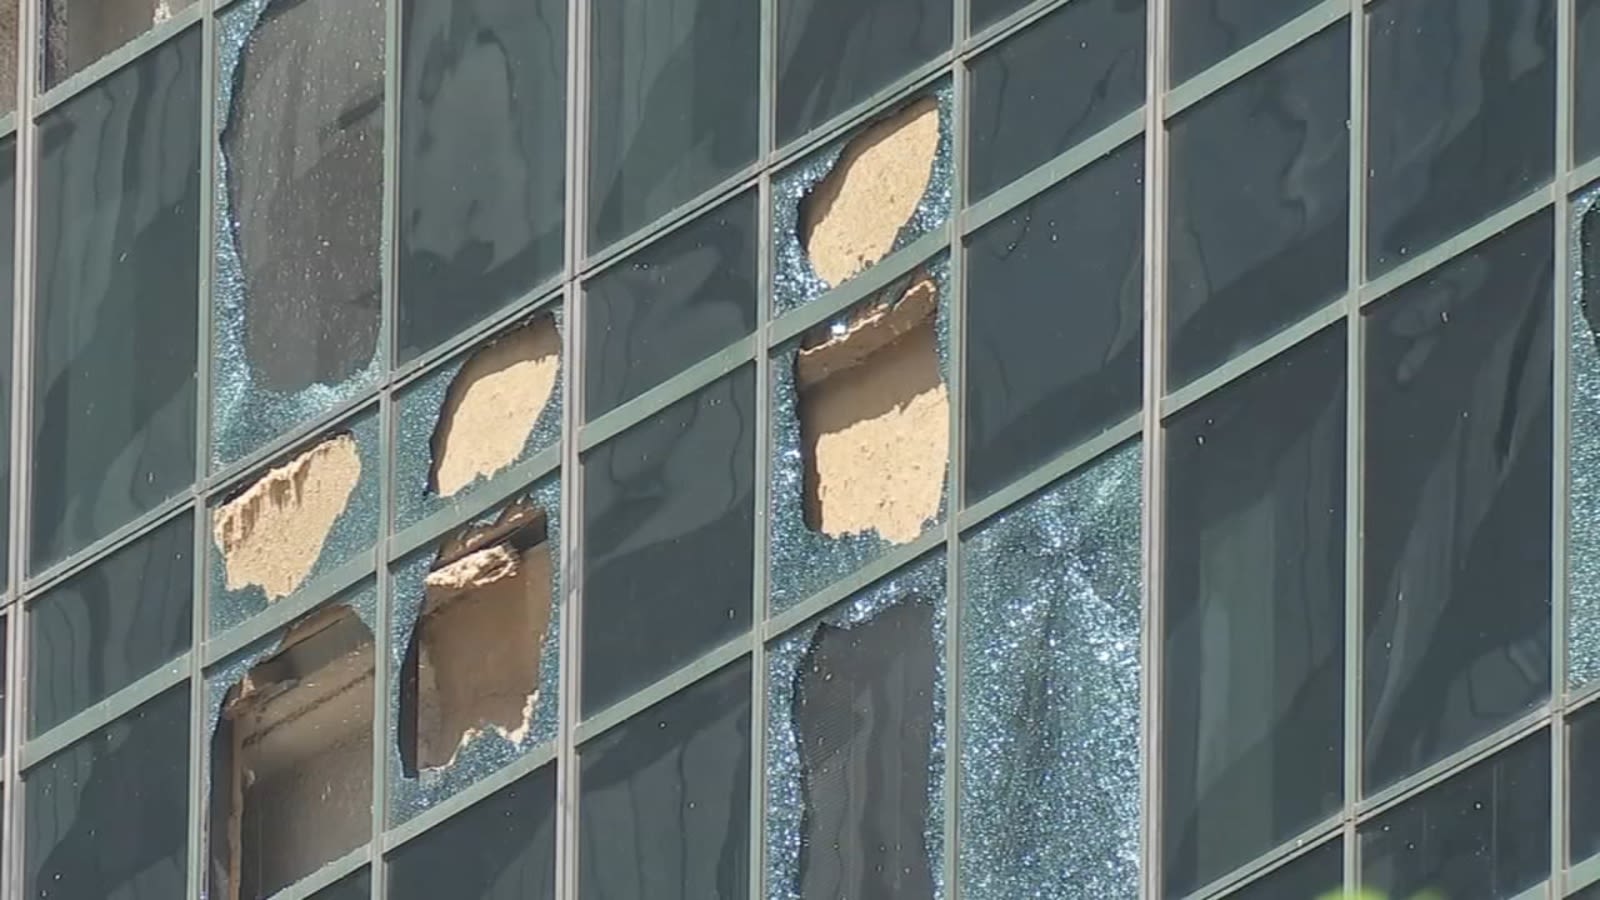 Storm blew out 2,500 high-rise windows or skylights in downtown 'exclusion zone,' officials say